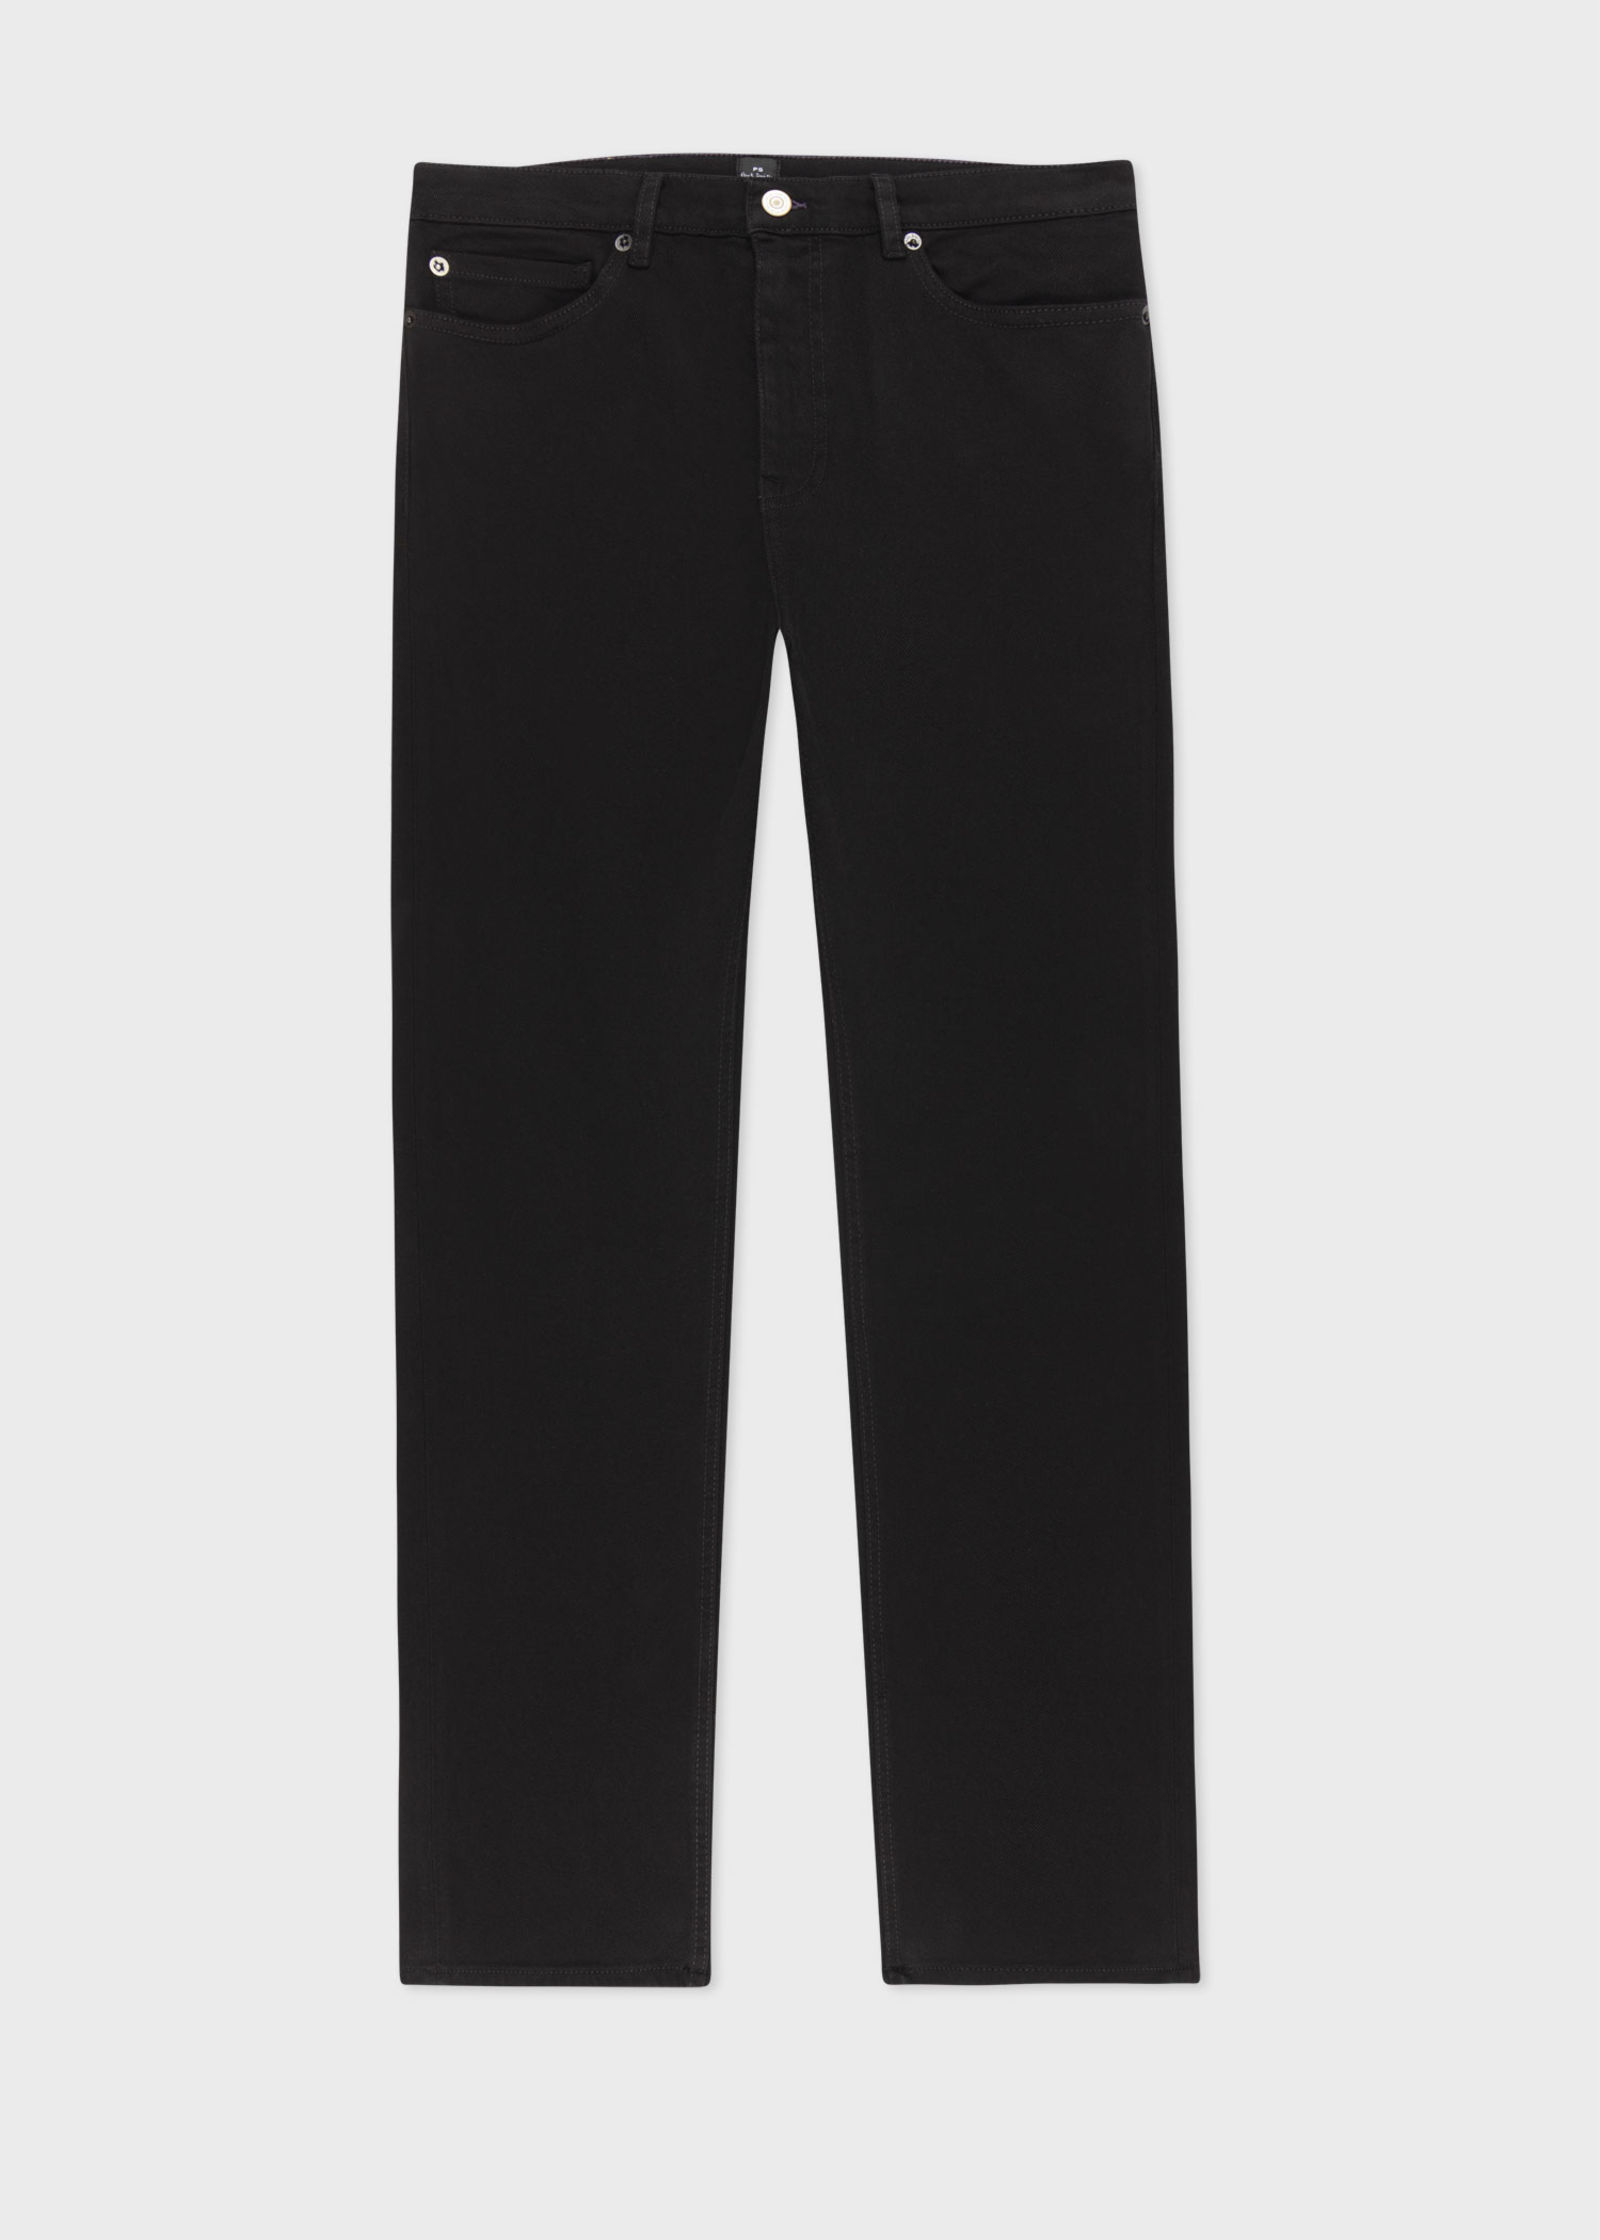 Paul Smith Black Happy Straight Fit Jeans